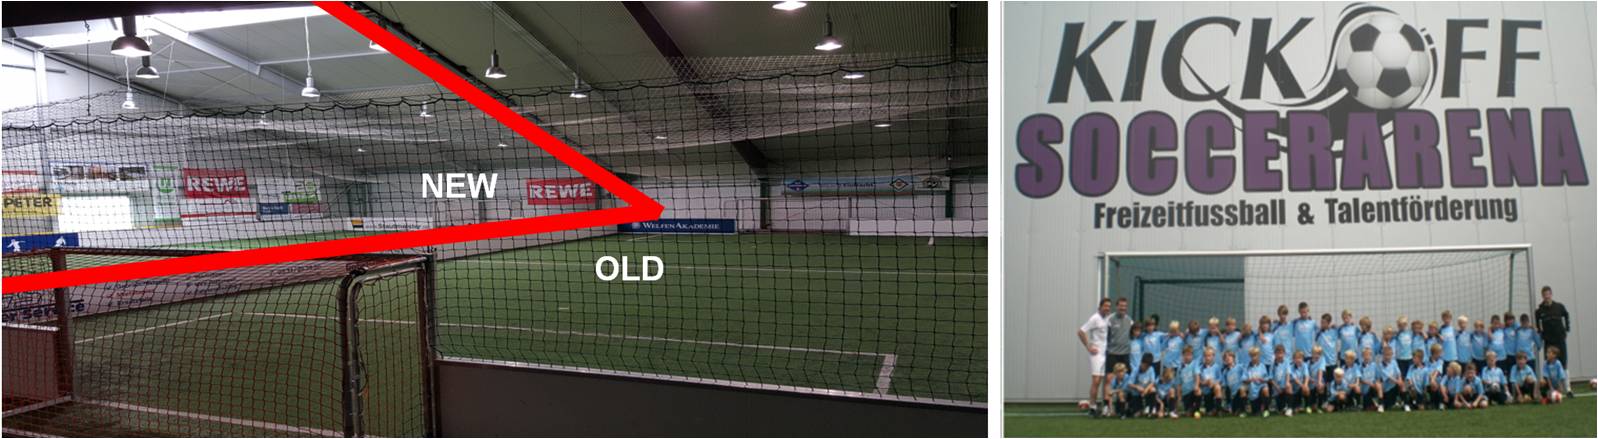 LED Distribution | Projects | Soccer Hall (KickOff Arena) | Braunschweig, Germany